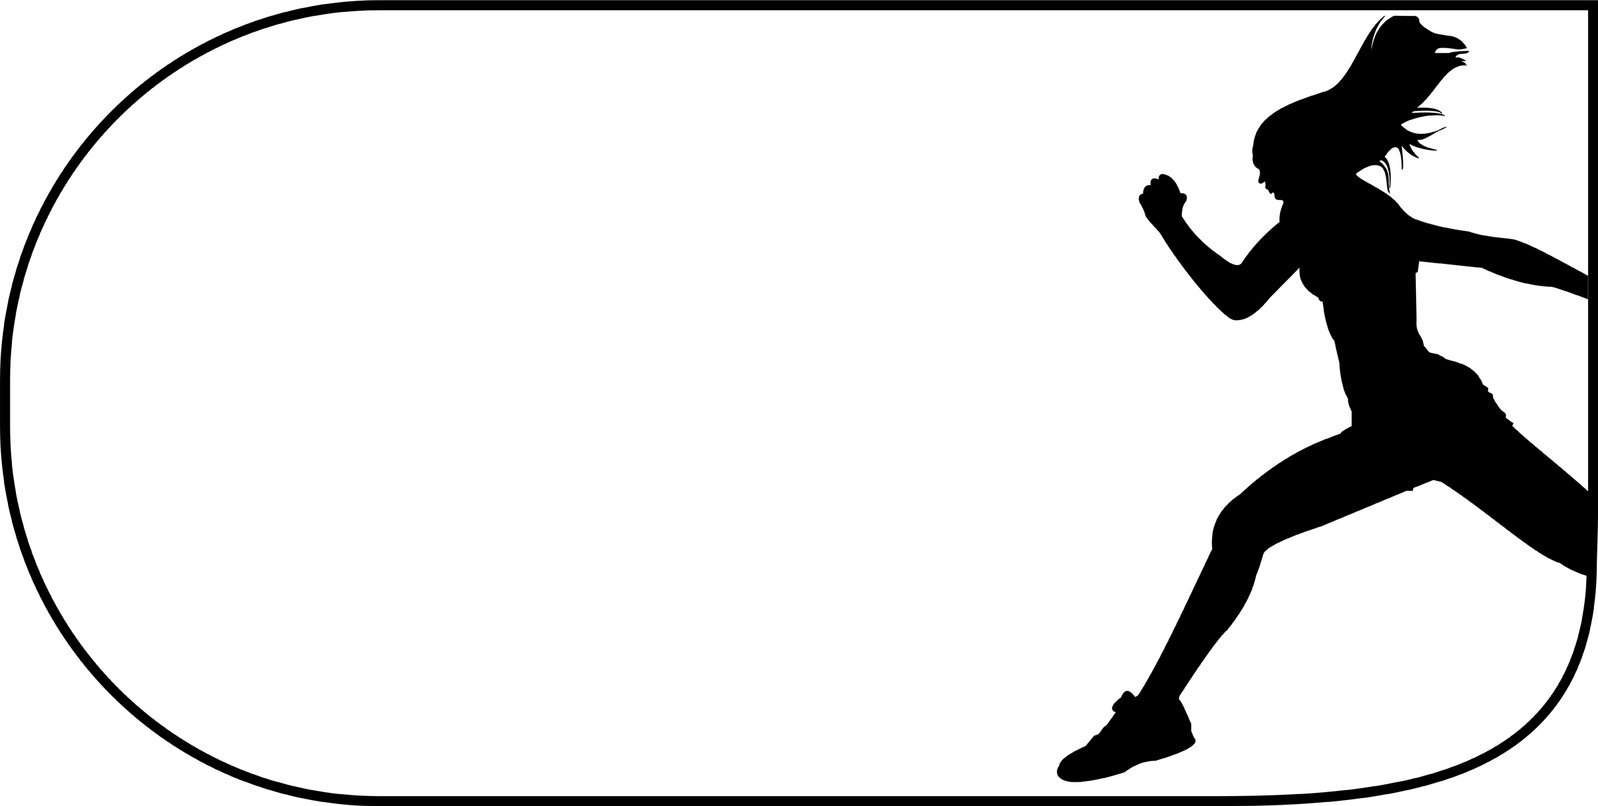 black silhouette of a woman running